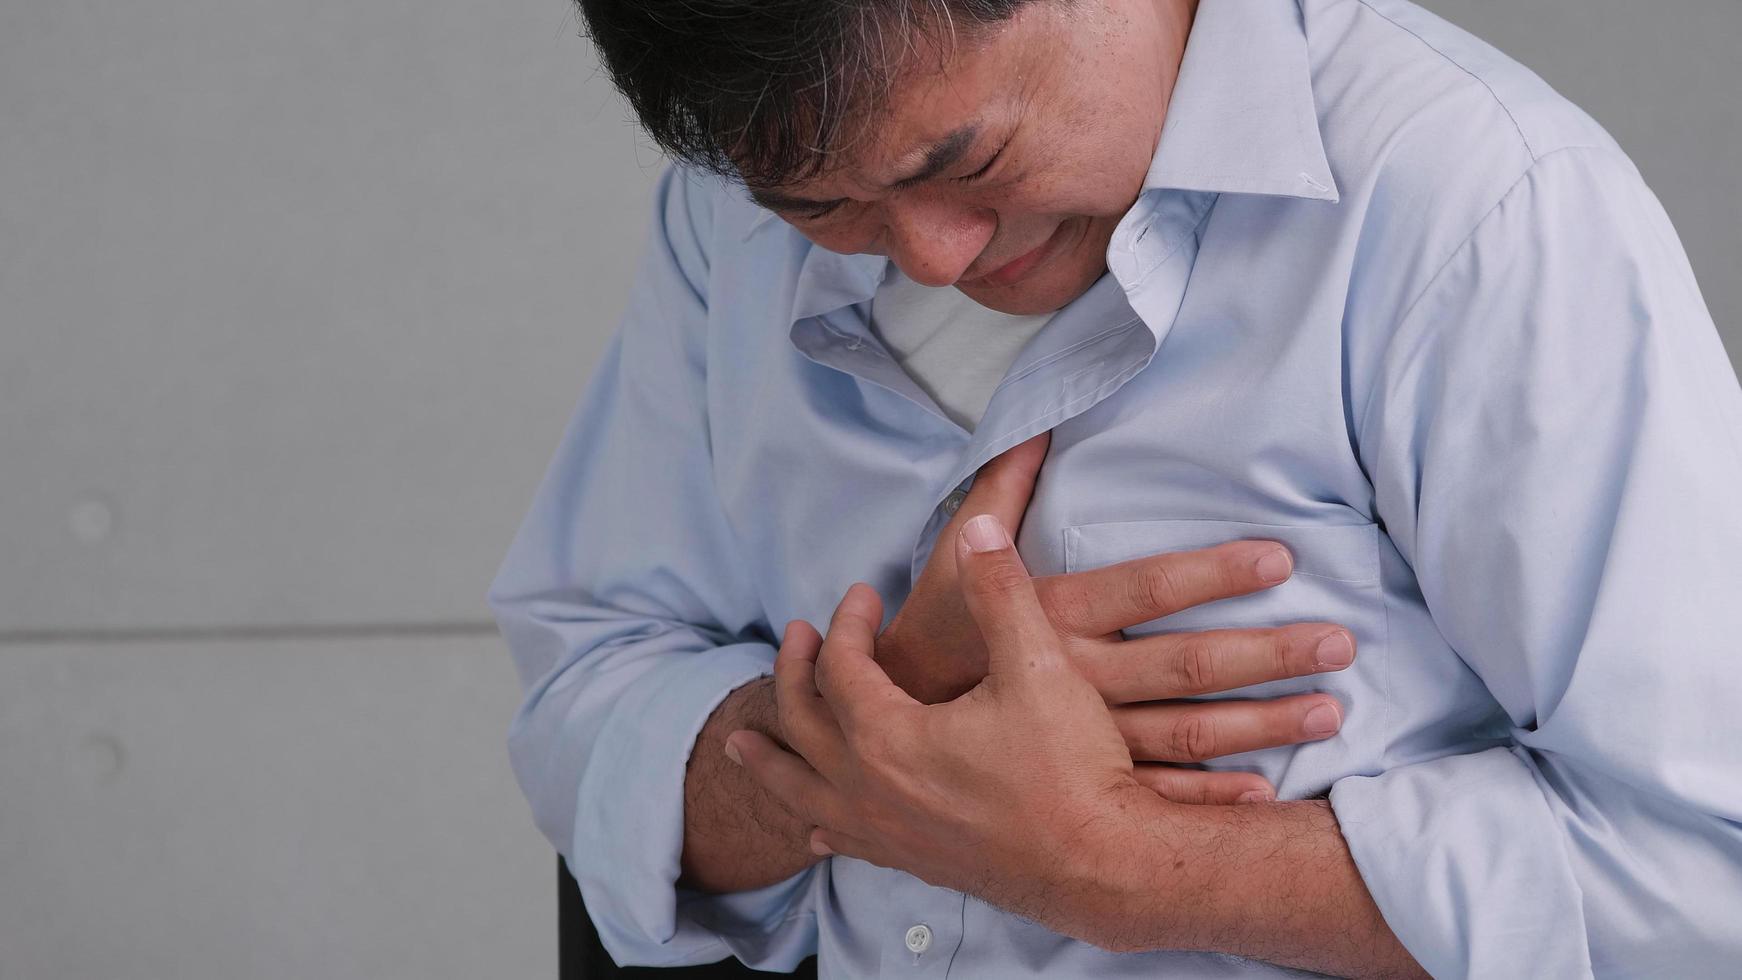 Asian man has chest pain caused by heart disease. photo